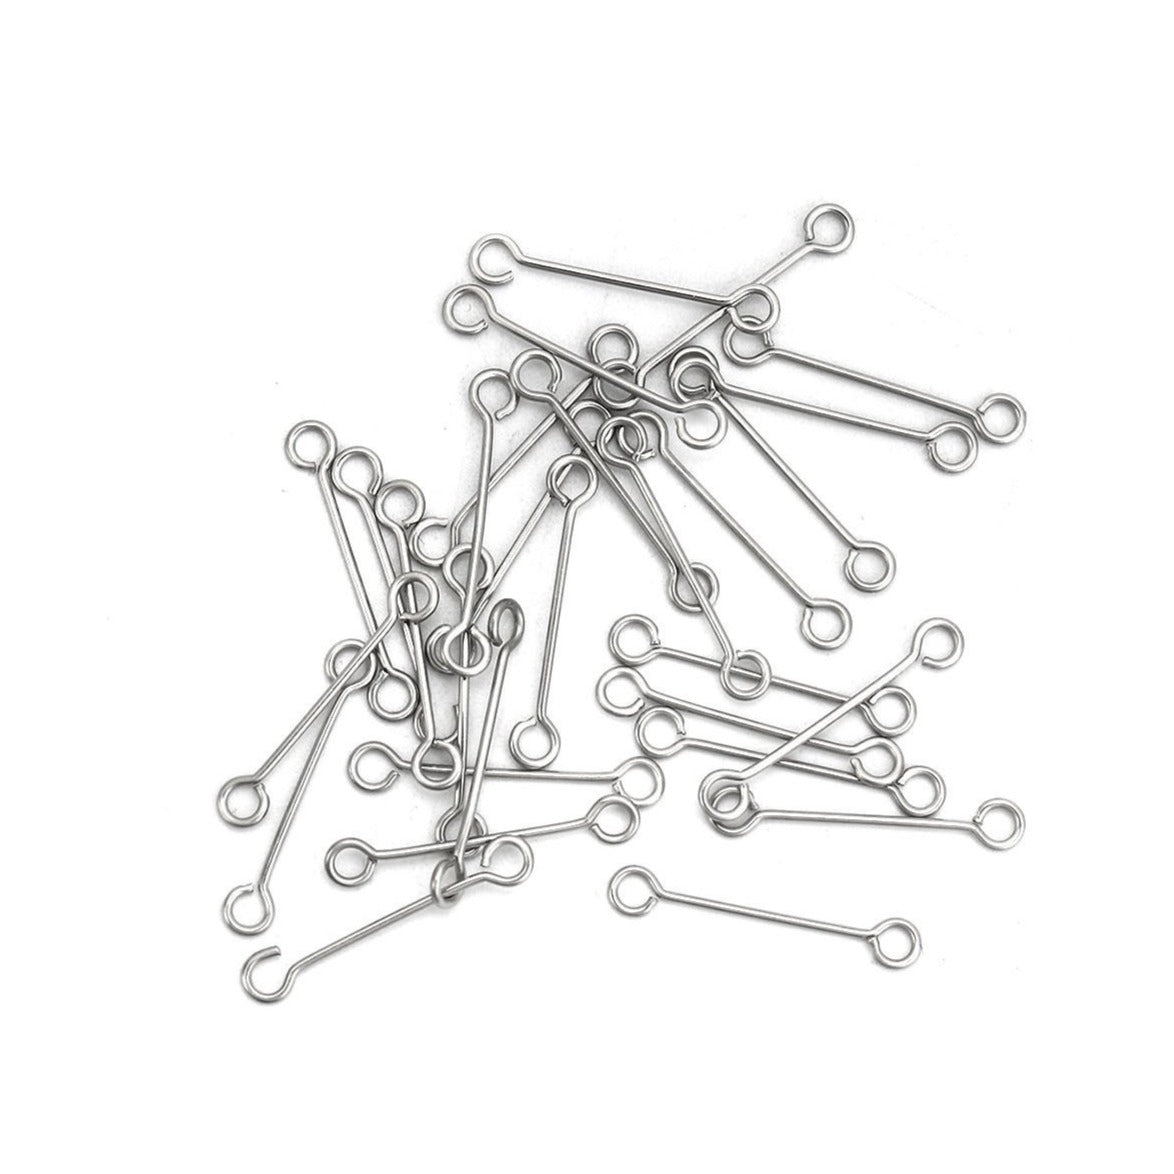 50 Stainless steel double sided eyepins - 19, 21 or 30mm - Hypoallergenic jewelry findings